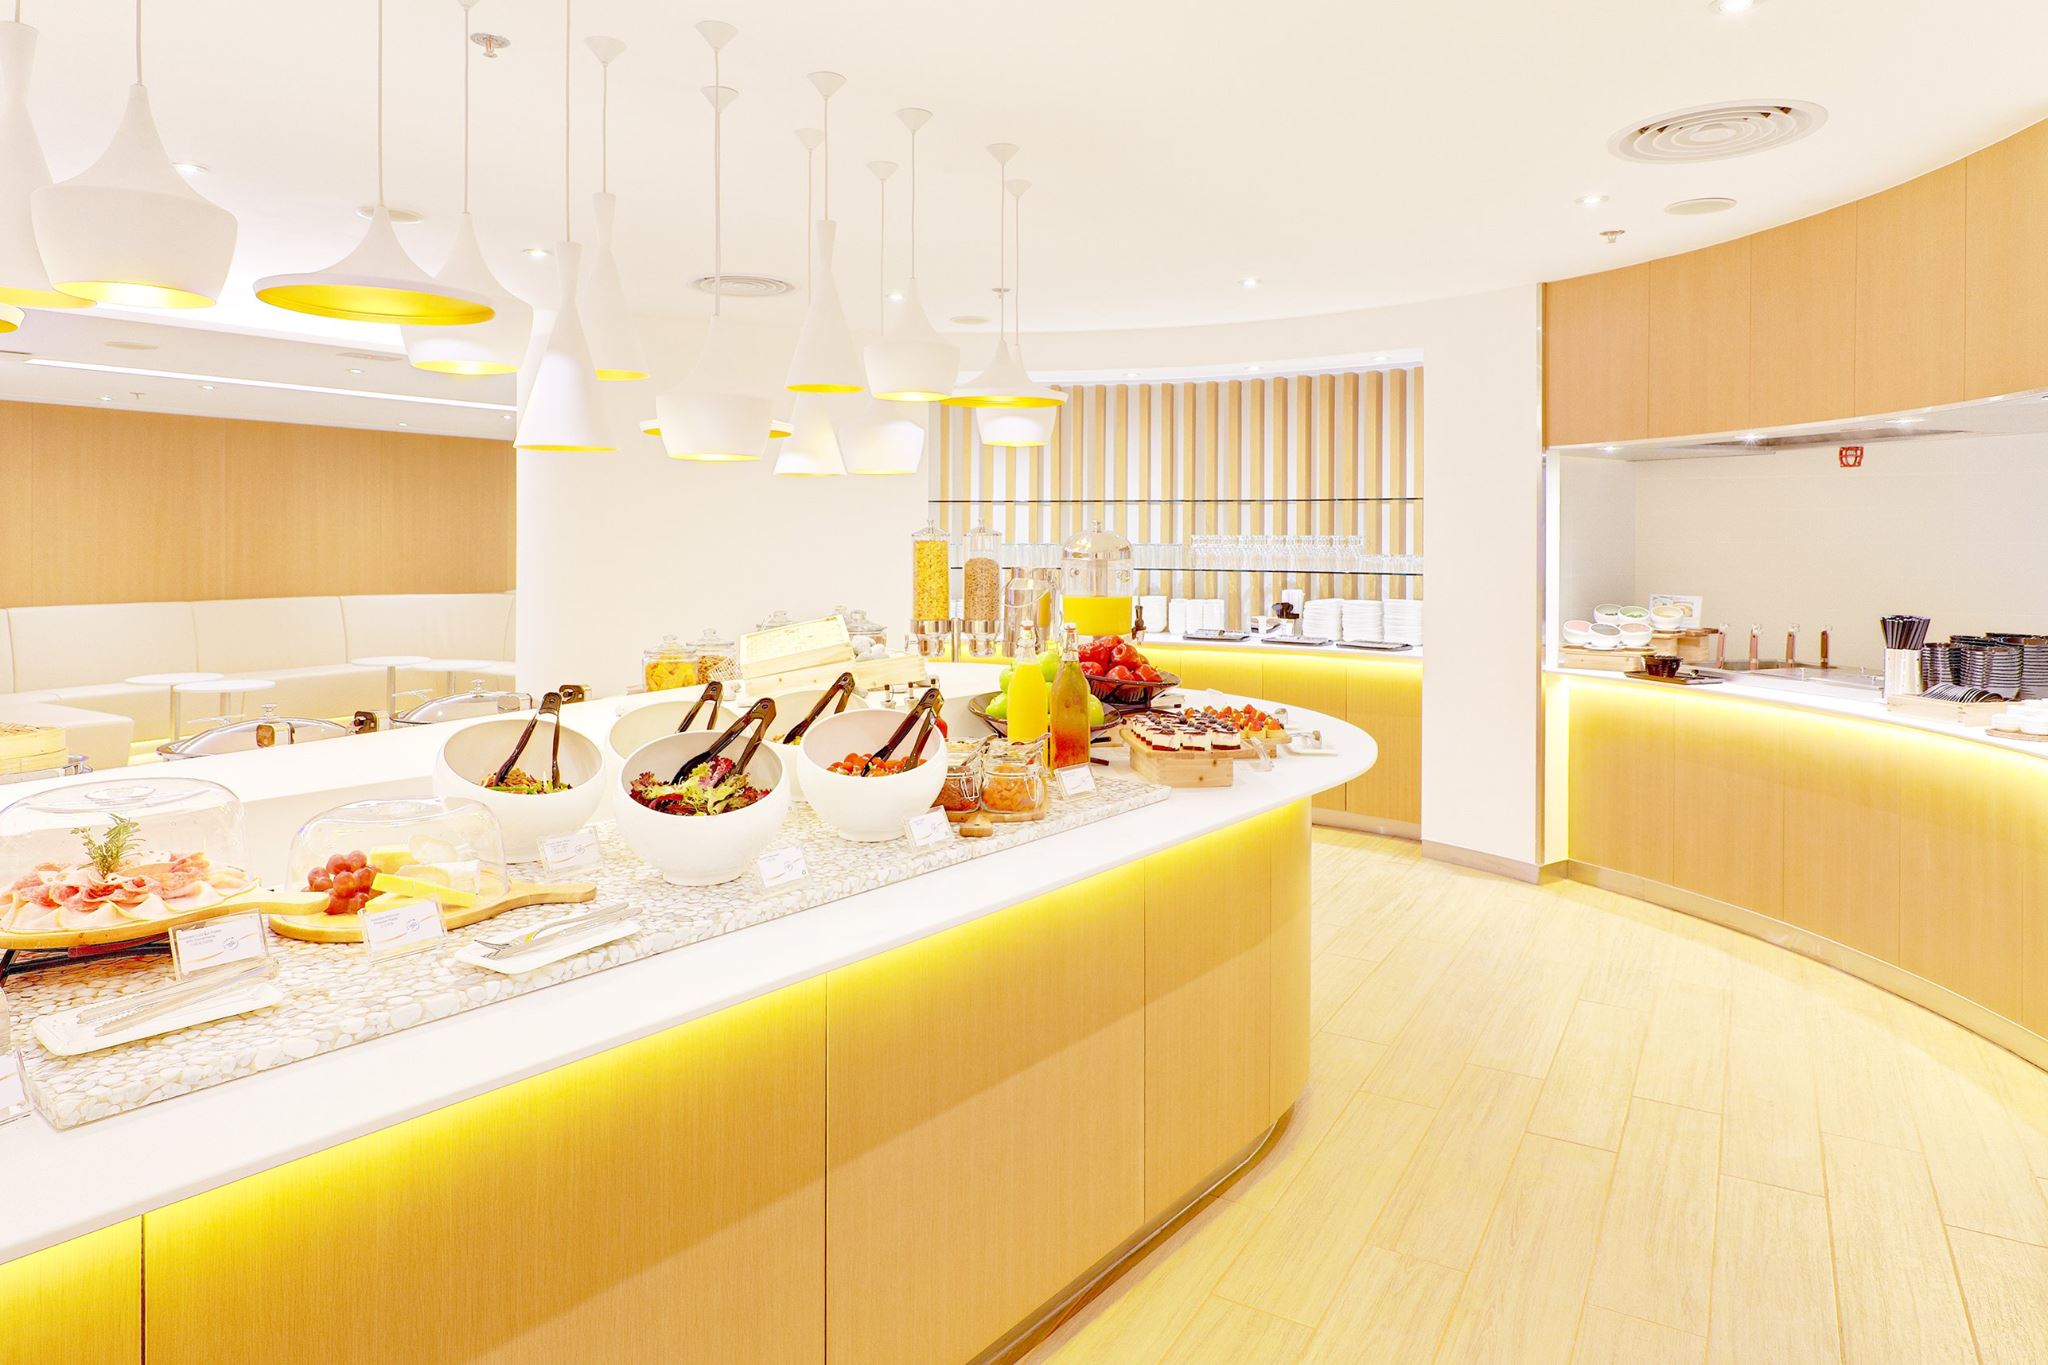 Hot and Cold International Buffet at SkyTeam Exclusive Lounge in Hong Kong International Airport